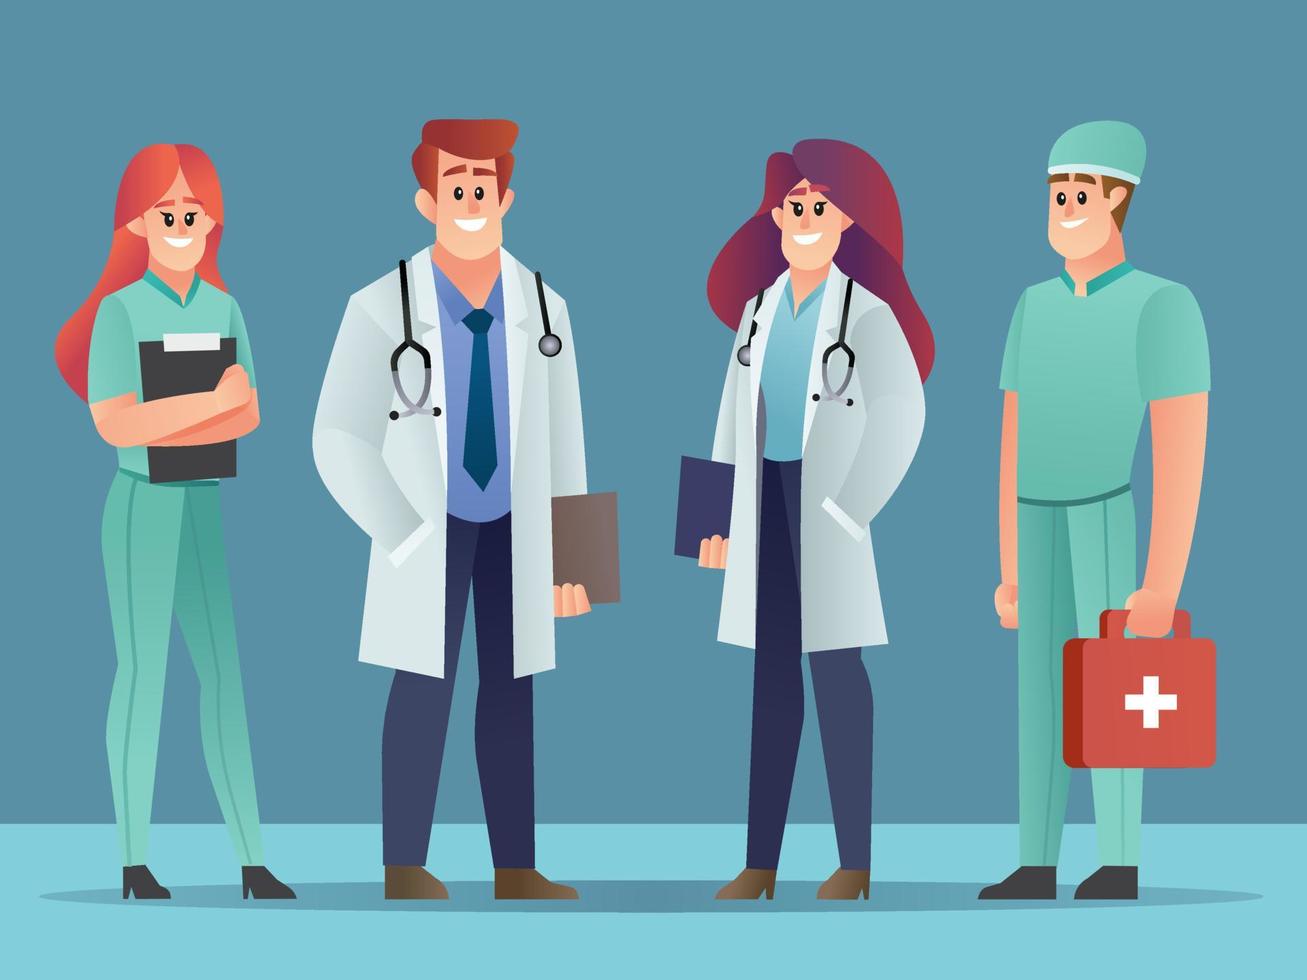 Set of doctor characters, medical team vector illustration